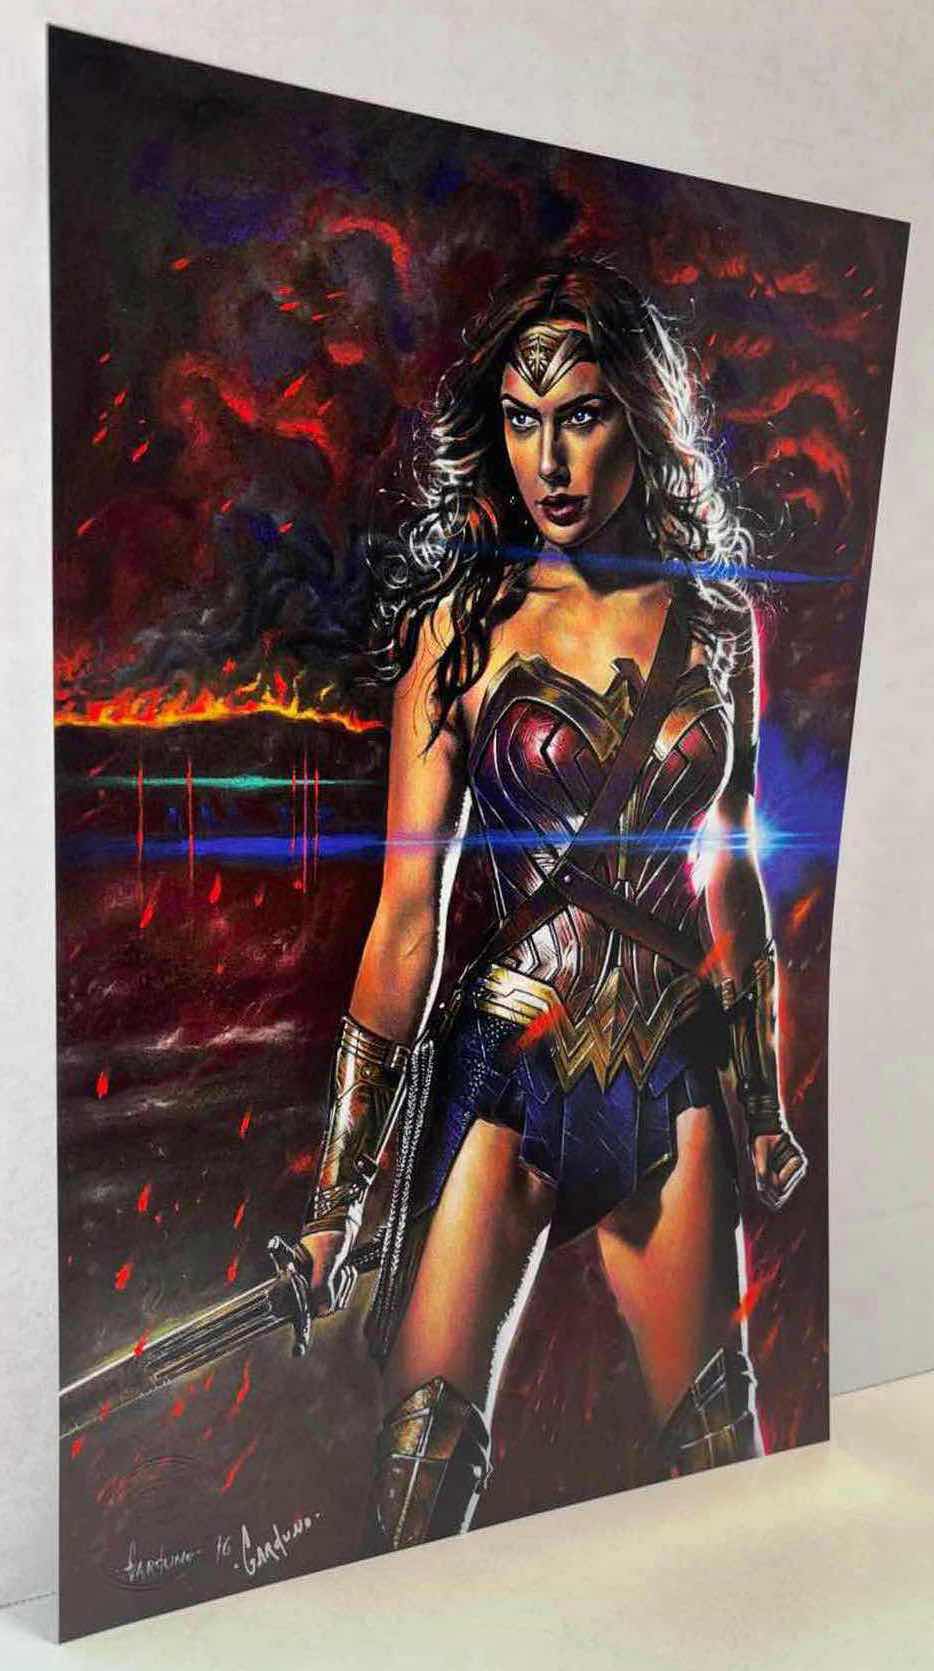 Photo 1 of VICTOR GARDUNO “DIANA PRINCE” 11” X 17” INFINITY GLOSS UNFRAMED PRINT W EMBOSSED SEAL, DIGITAL SIGNATURE & OFFICIAL SIGNATURE W COA INCLUDED, STORED IN A RIGID PRINT PROTECTOR SLEEVE